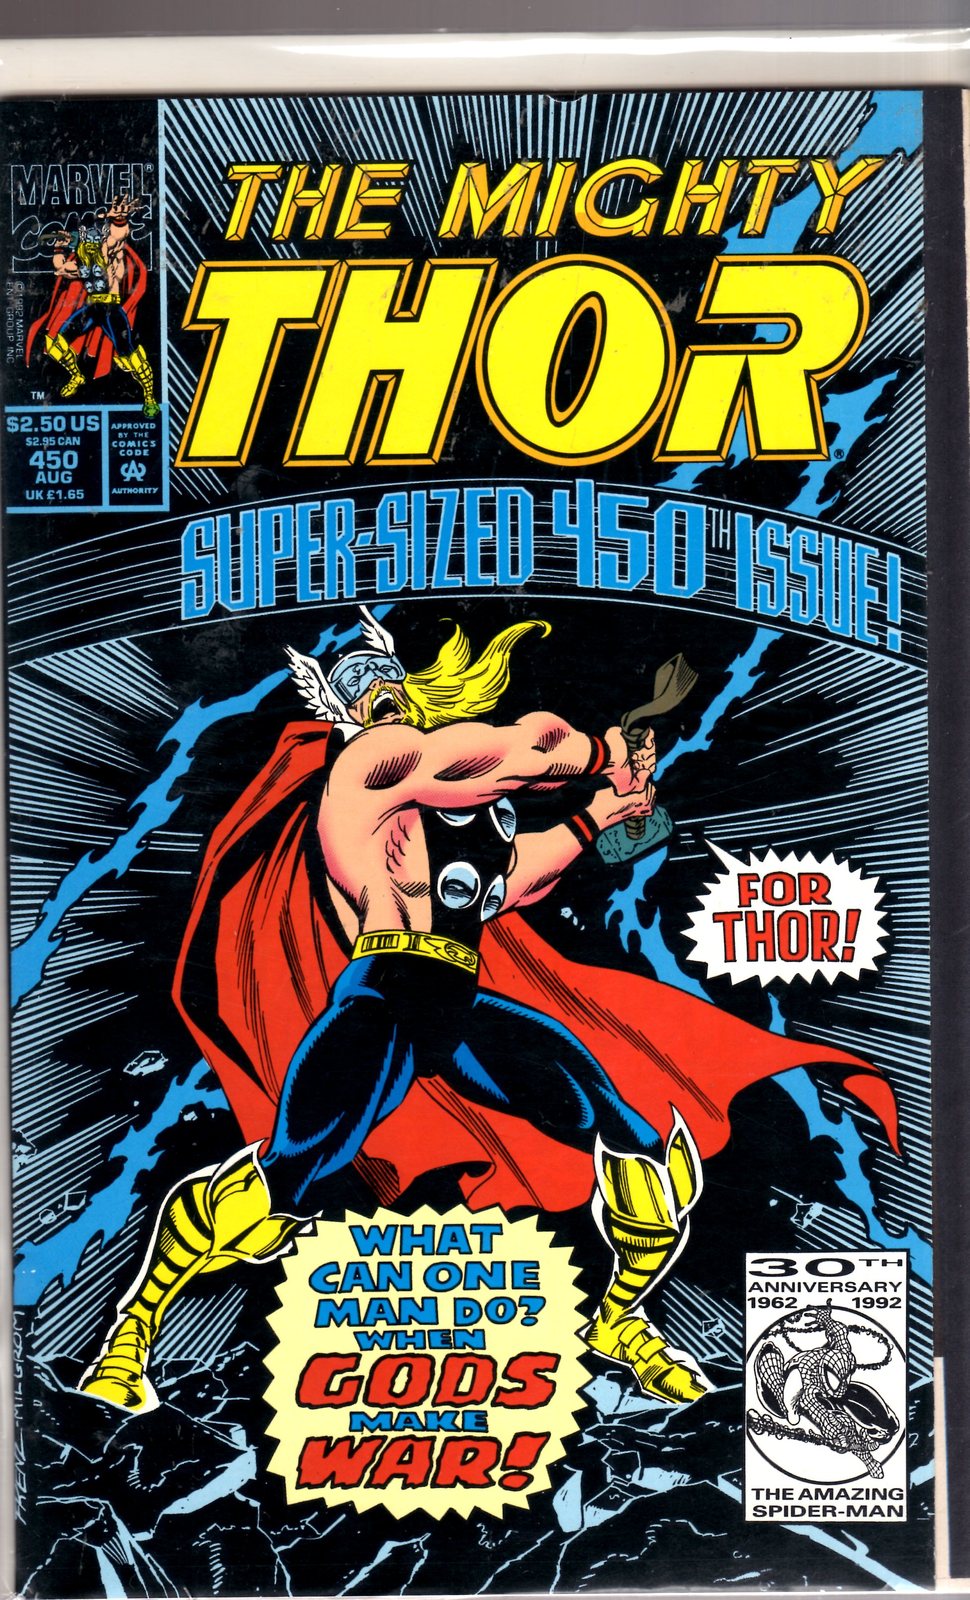 Marvel Comiics - The Mighty Thor #450 What Can One Man Do? When Gods Make War!  - $8.00